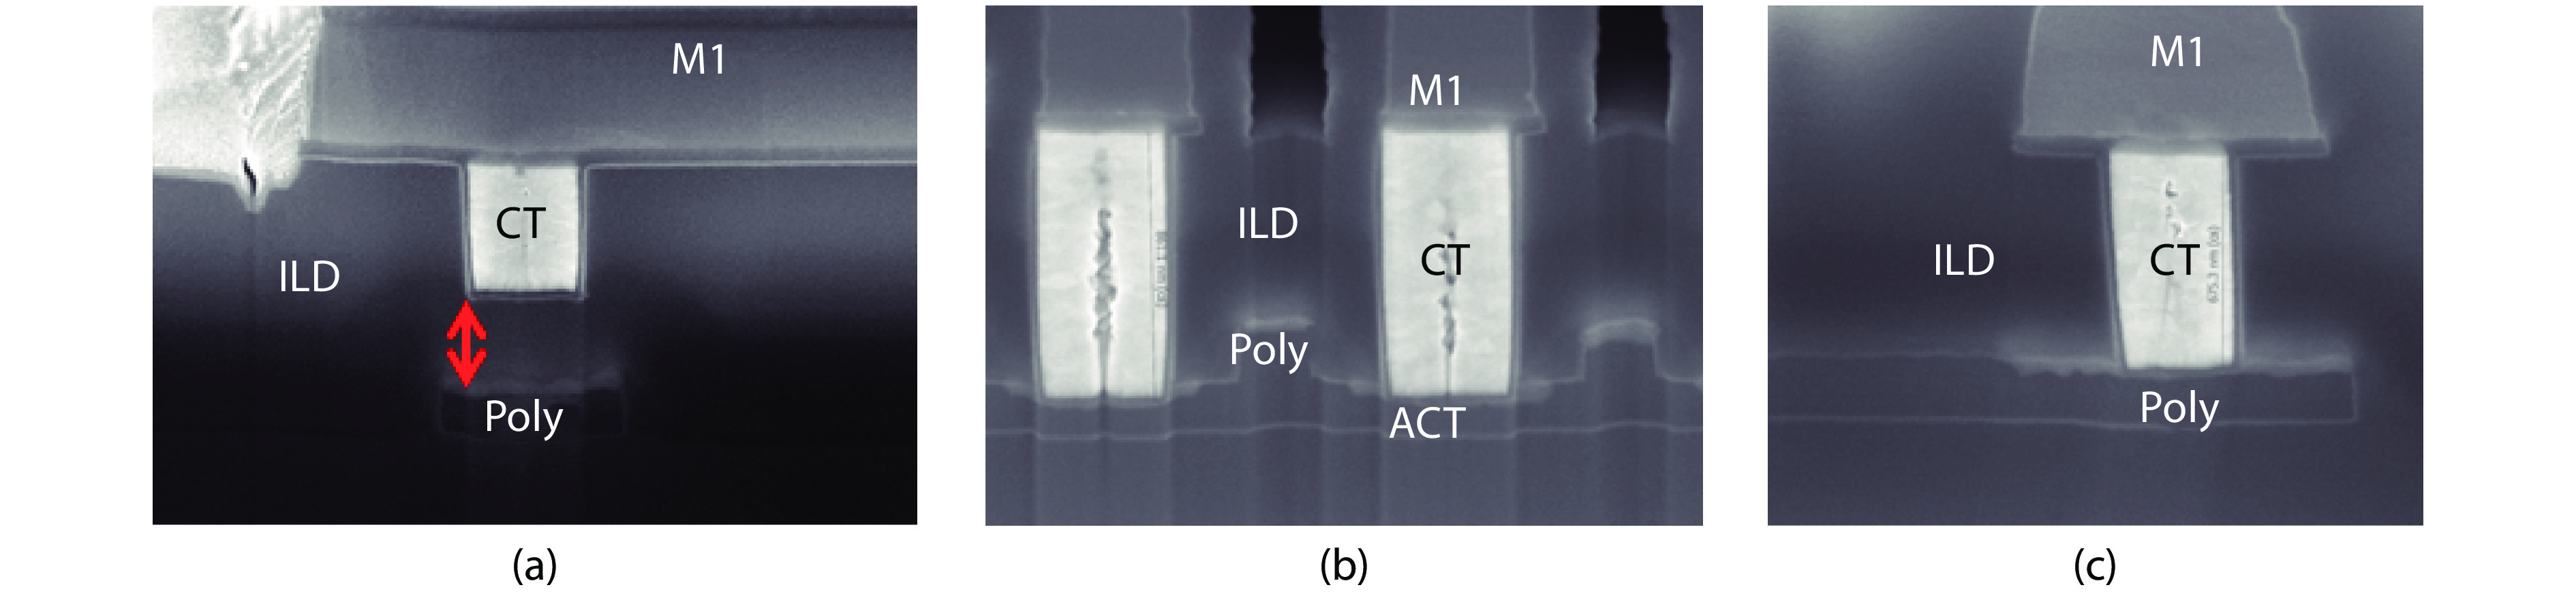 FA SEM result for a CP fail sample at different pattern regions: (a) CT on poly-sparse pattern; (b) CT on an active region; and (c) CT on a poly-dense pattern. M1 is metal 1 for electrical connection, ILD is inter-layer-dielectric, ACT is active region for device, poly is for MOSFET or resistance, salicide is formed between CT and ACT/poly.